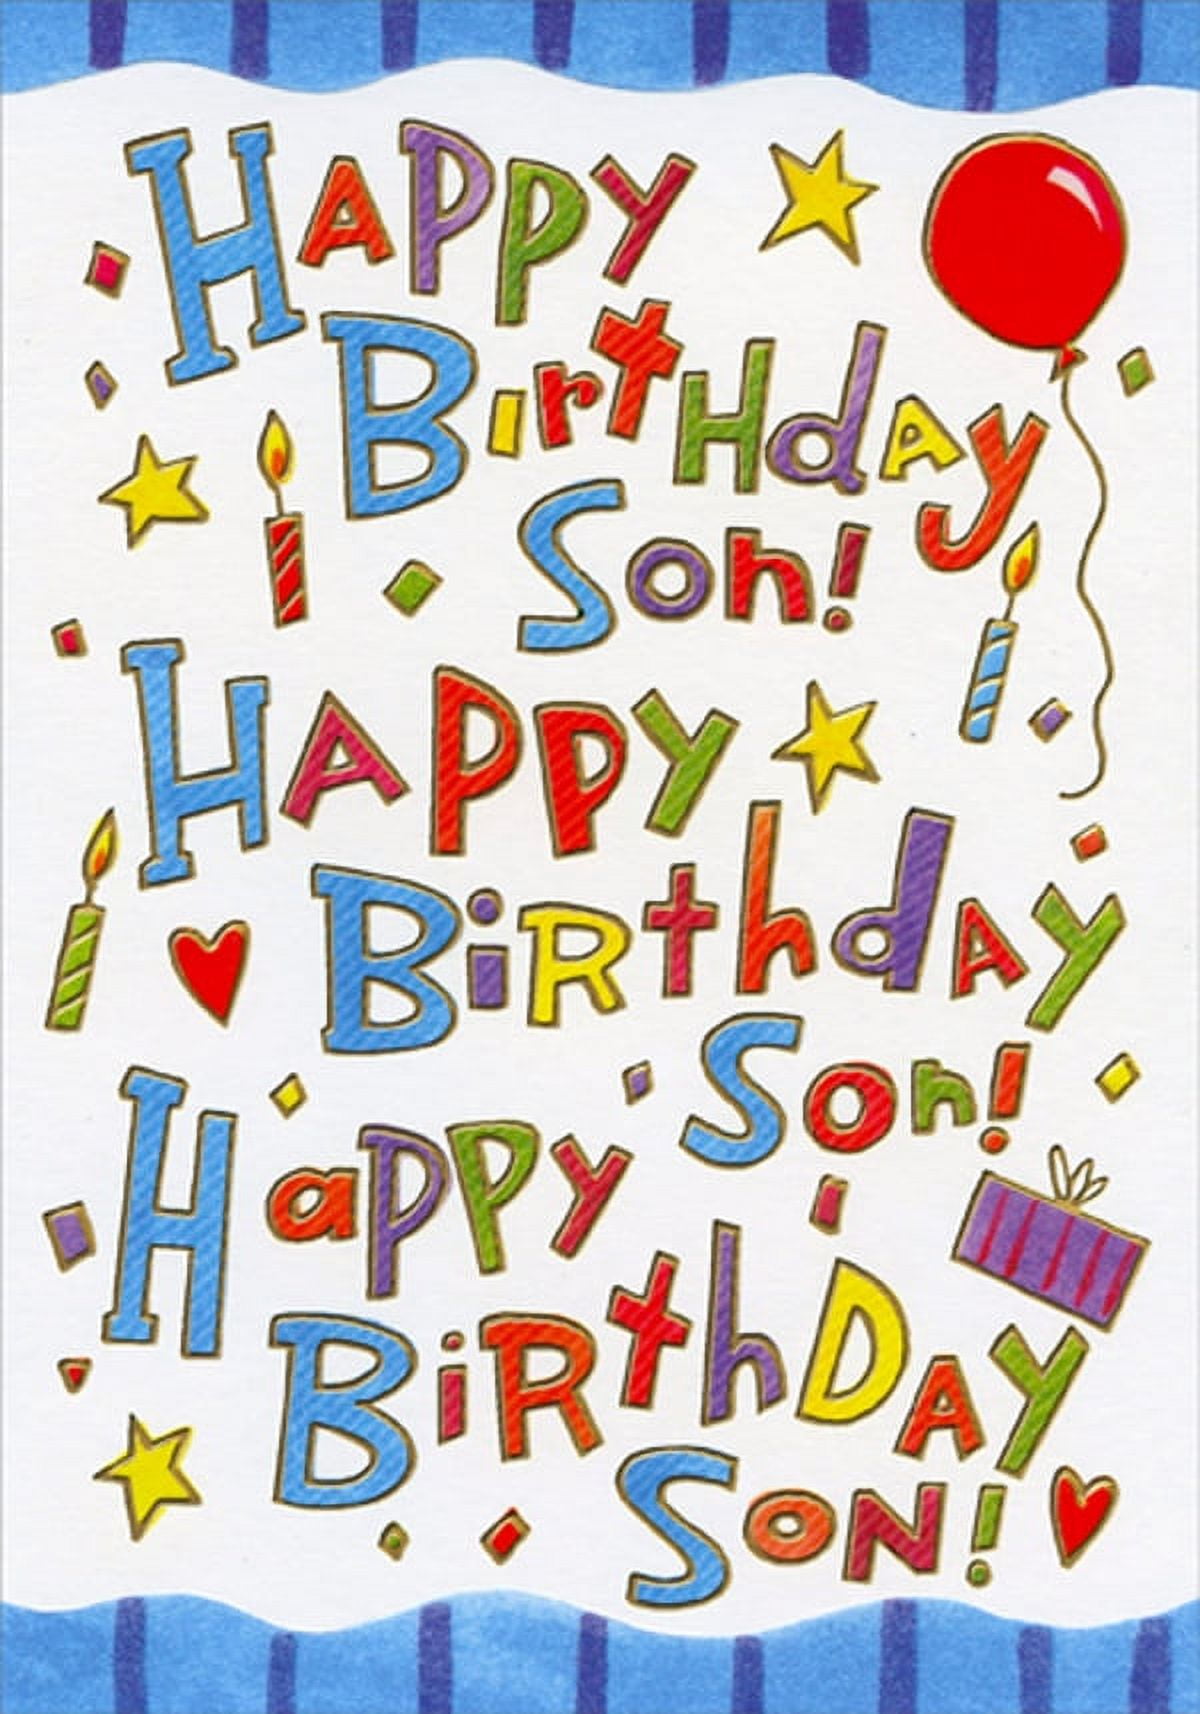 Designer Greetings Happy Birthday Son Repeated 3 Times Birthday Card ...